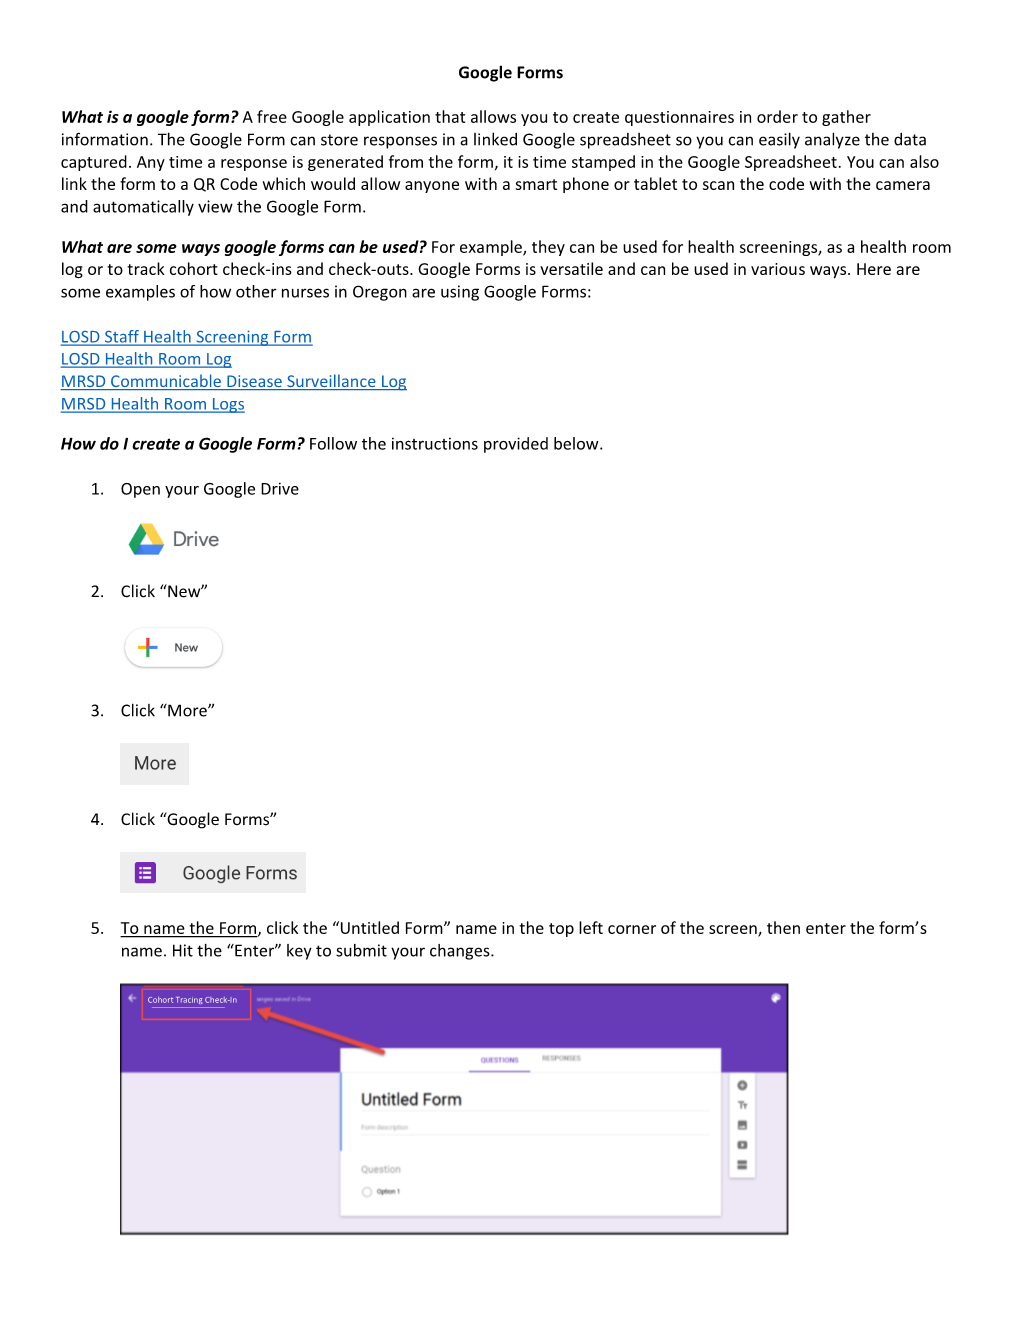 Google Forms What Is a Google Form? a Free Google Application That